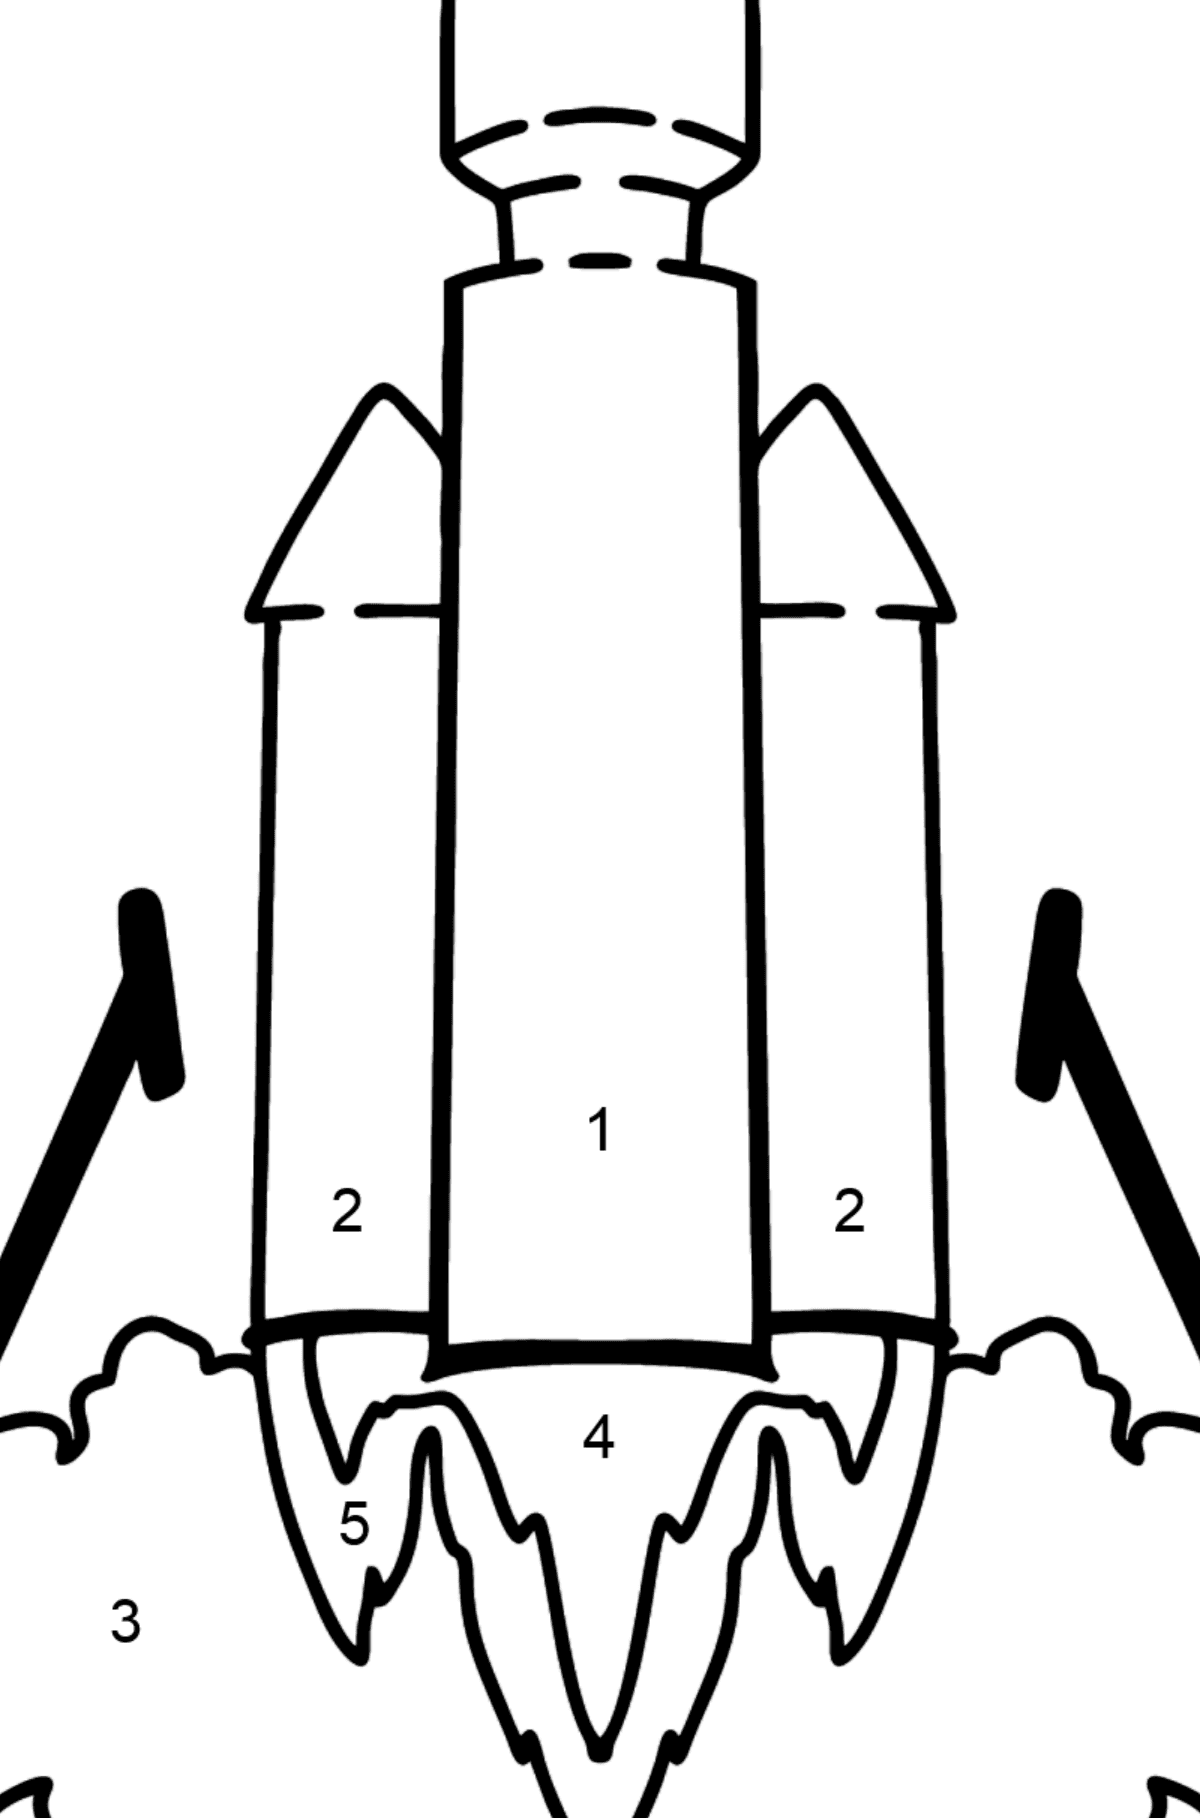 Rocket Launch coloring page - Coloring by Numbers for Kids